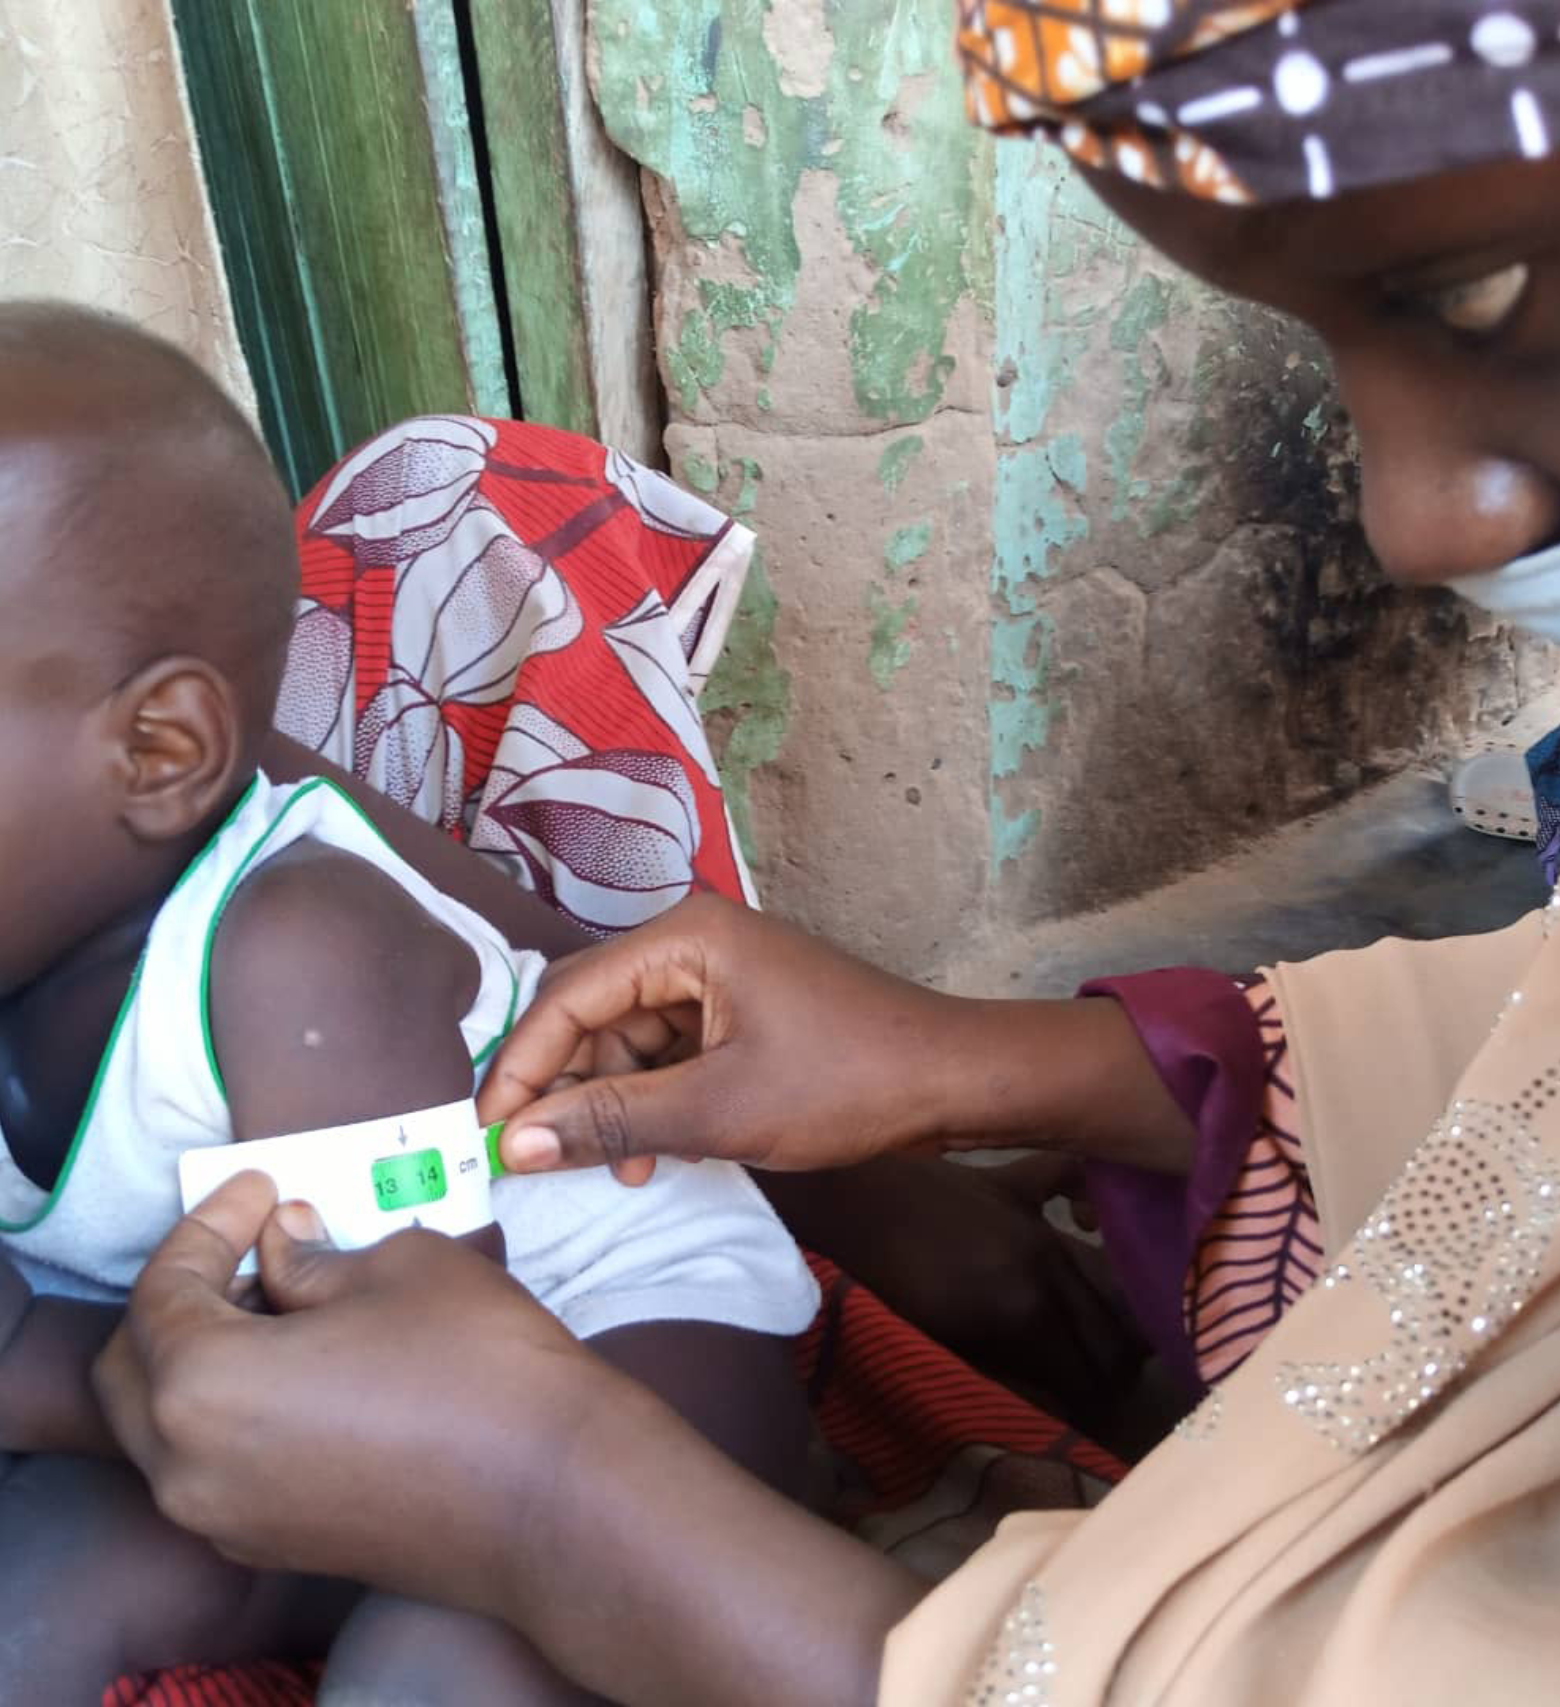 Our Village Health Worker (VHW) program in Borno State, Nigeria, trained 219 VHWs to conduct home visits to provide basic health information and encourage the use of health services.